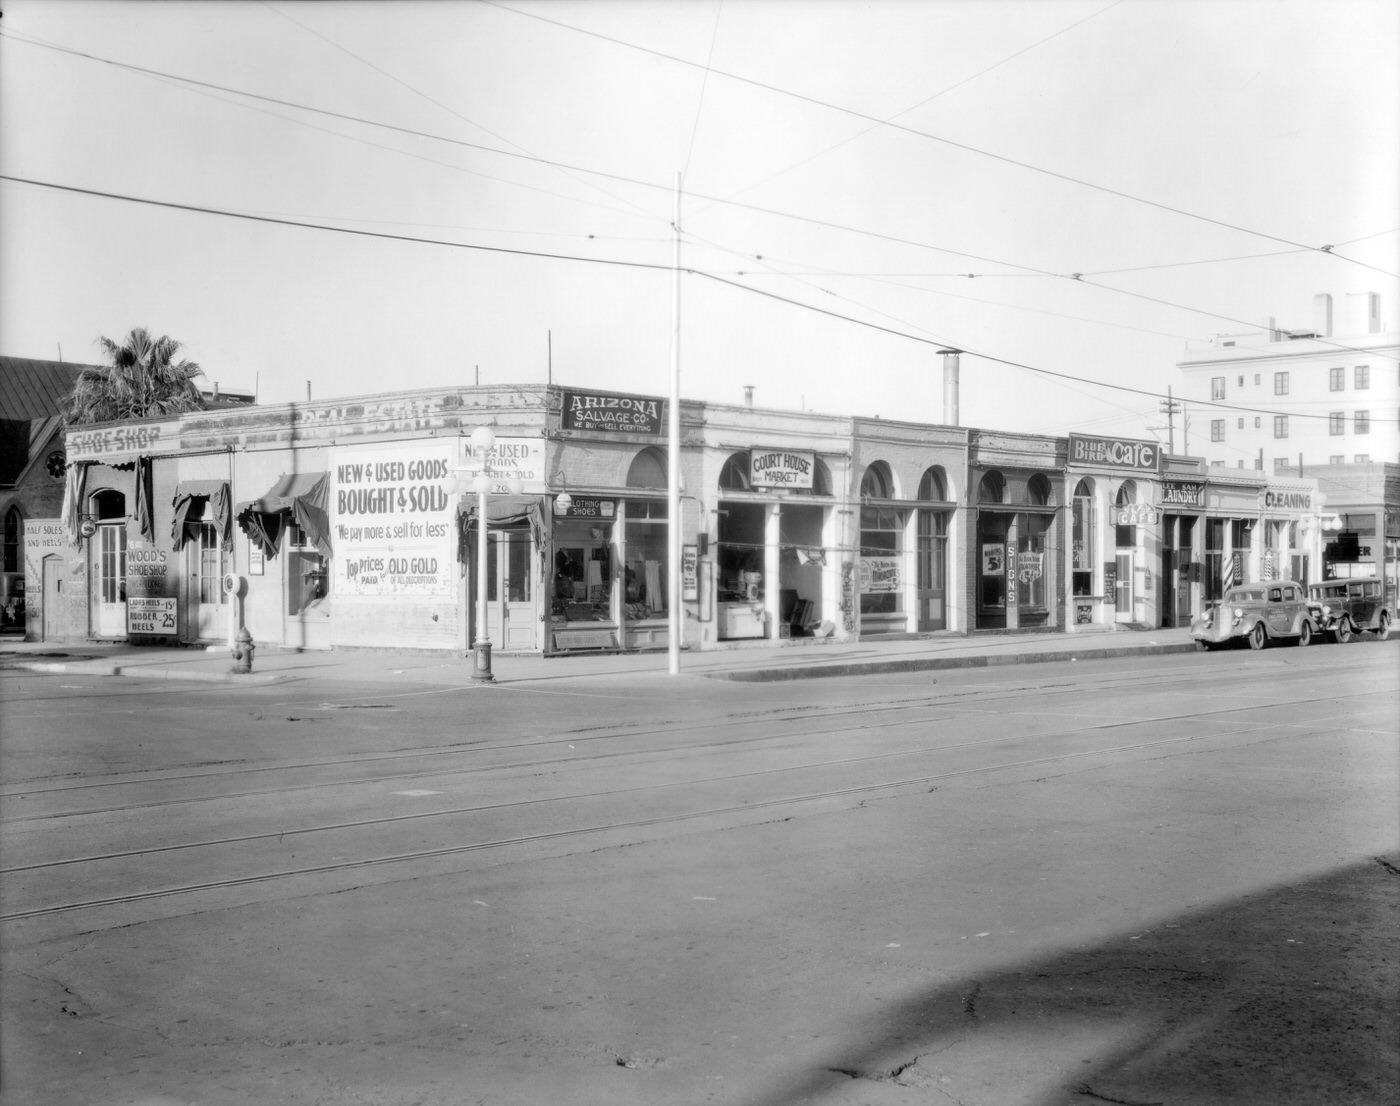 Southwest Corner of Second Ave. and Washington St., 1930s. Arizona Salvage Co., the Court House Market, the Blue Bird Café, and Wood's Shoe Shop are visible.